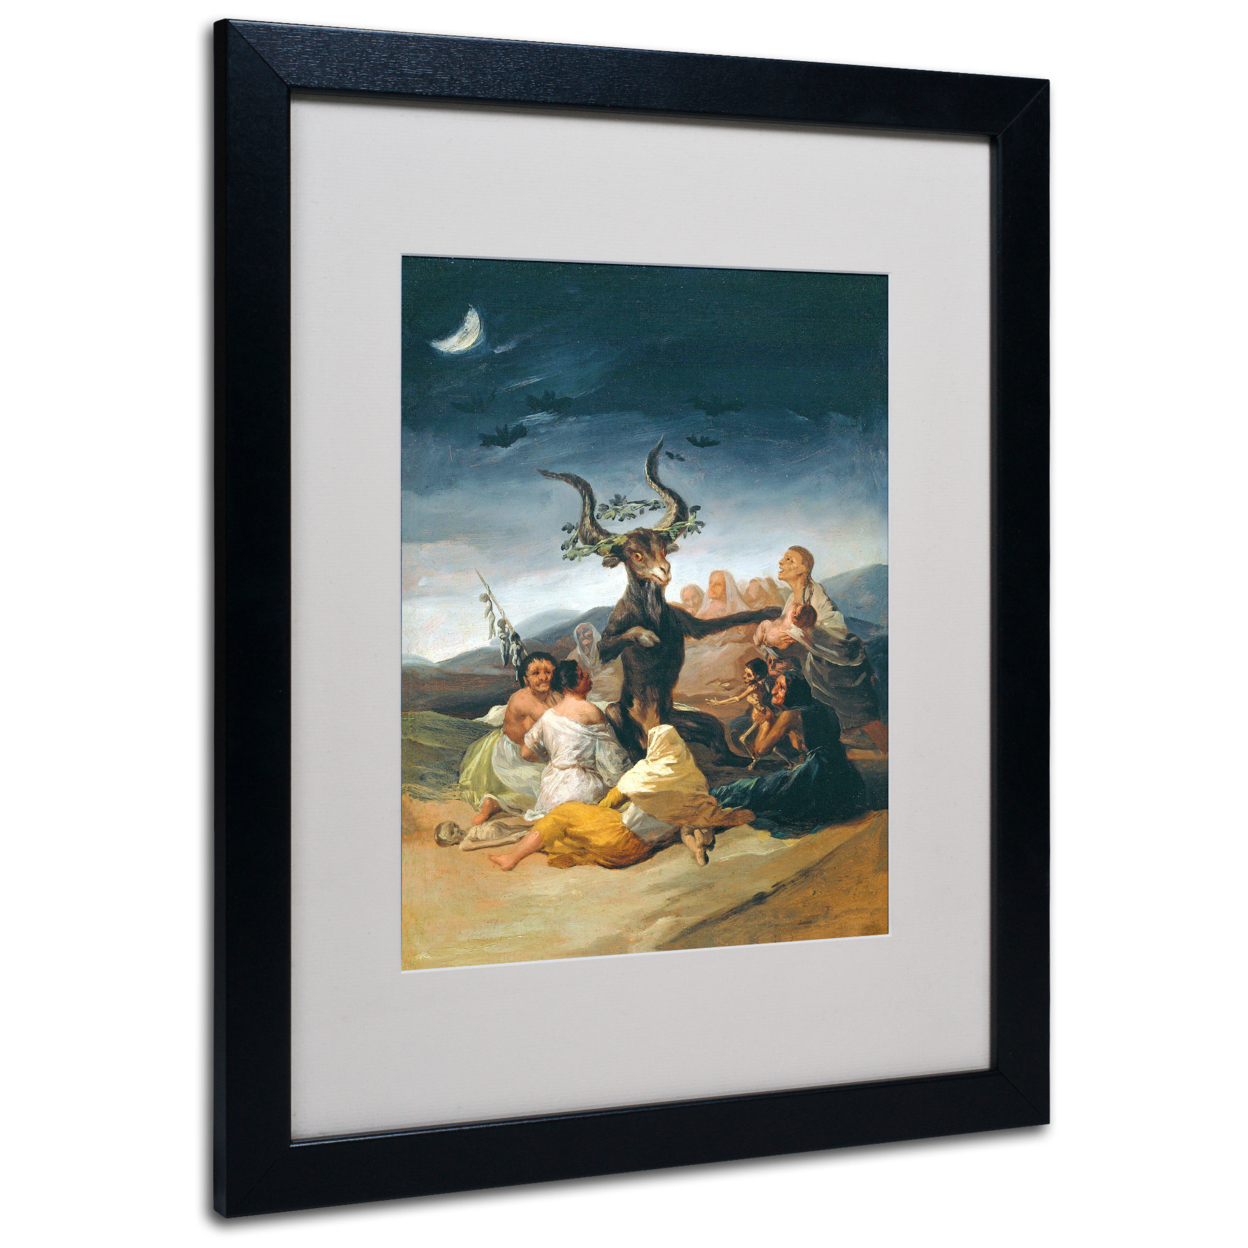 Francisco Goya 'The Witches' Sabbath' Black Wooden Framed Art 18 X 22 Inches